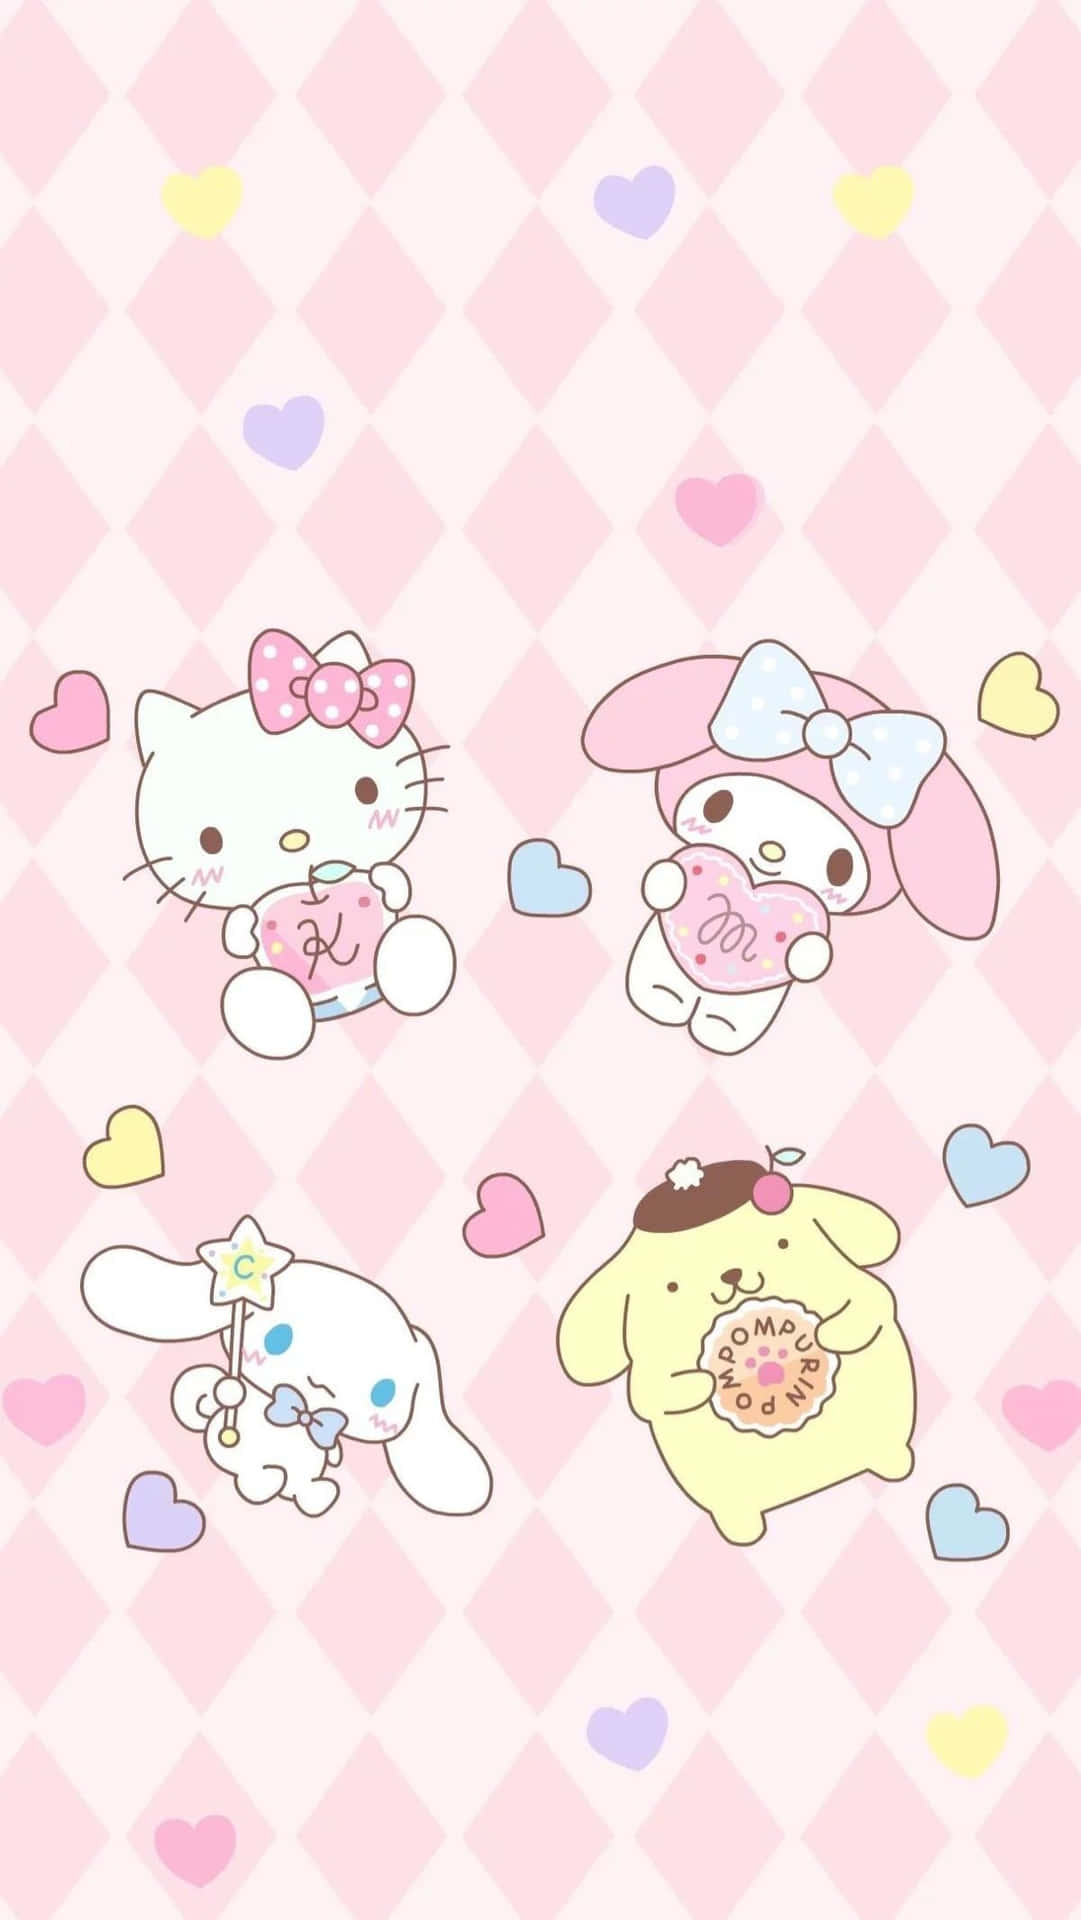 Get Ready for Summer with the Sanrio Phone Wallpaper